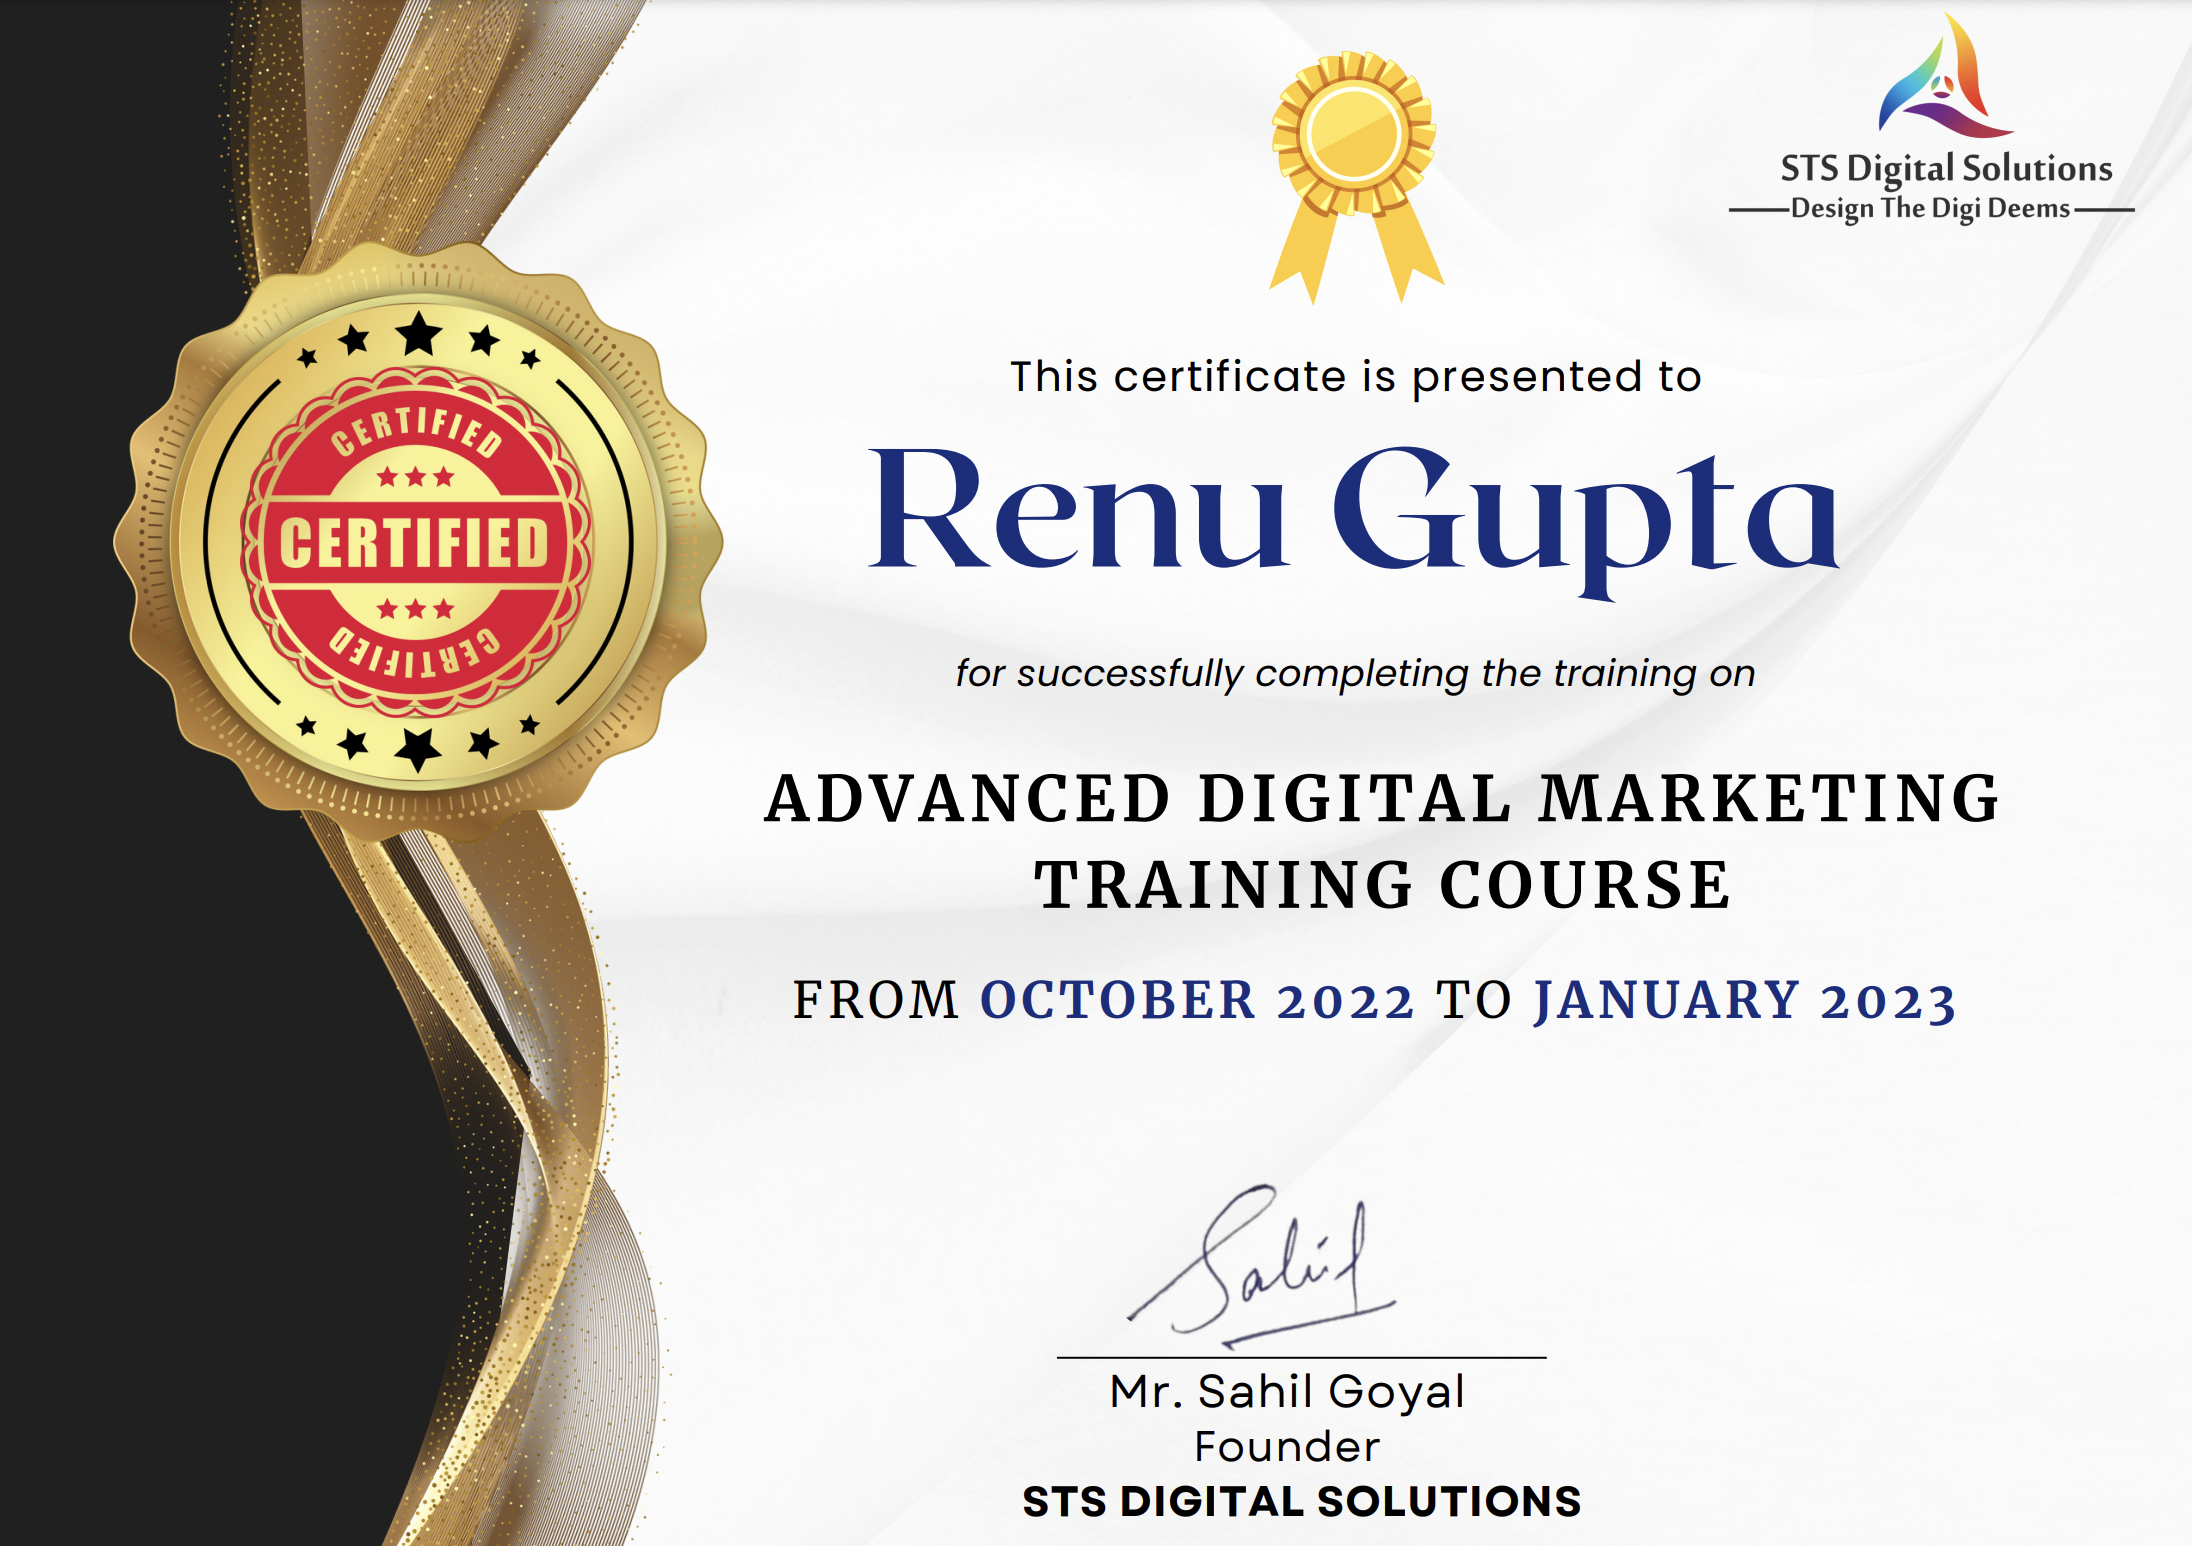 Digital Marketing Course Certificate from STS Digital Solutions